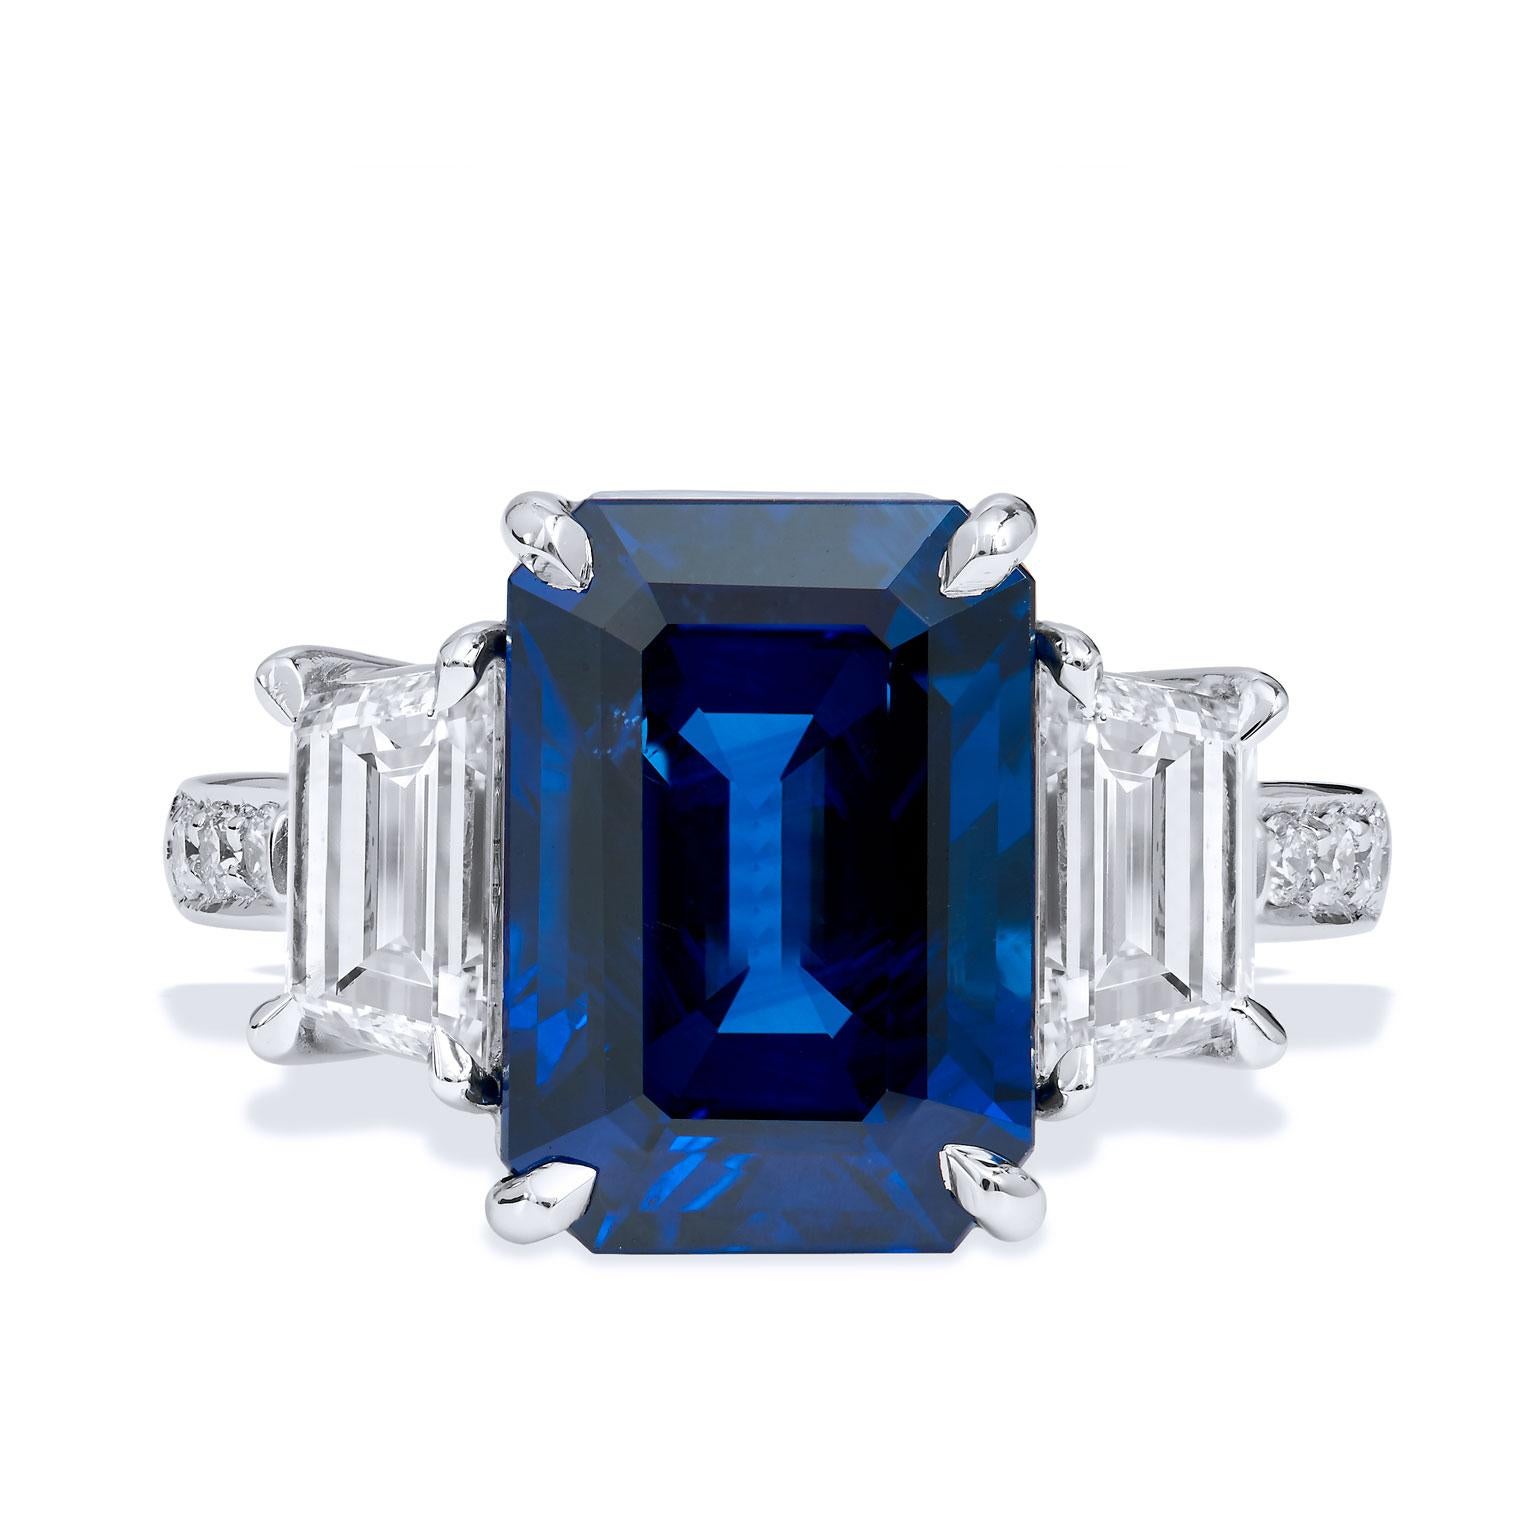 Madagascar Royal Blue Sapphire Diamond Ring Handmade In New Condition For Sale In Miami, FL